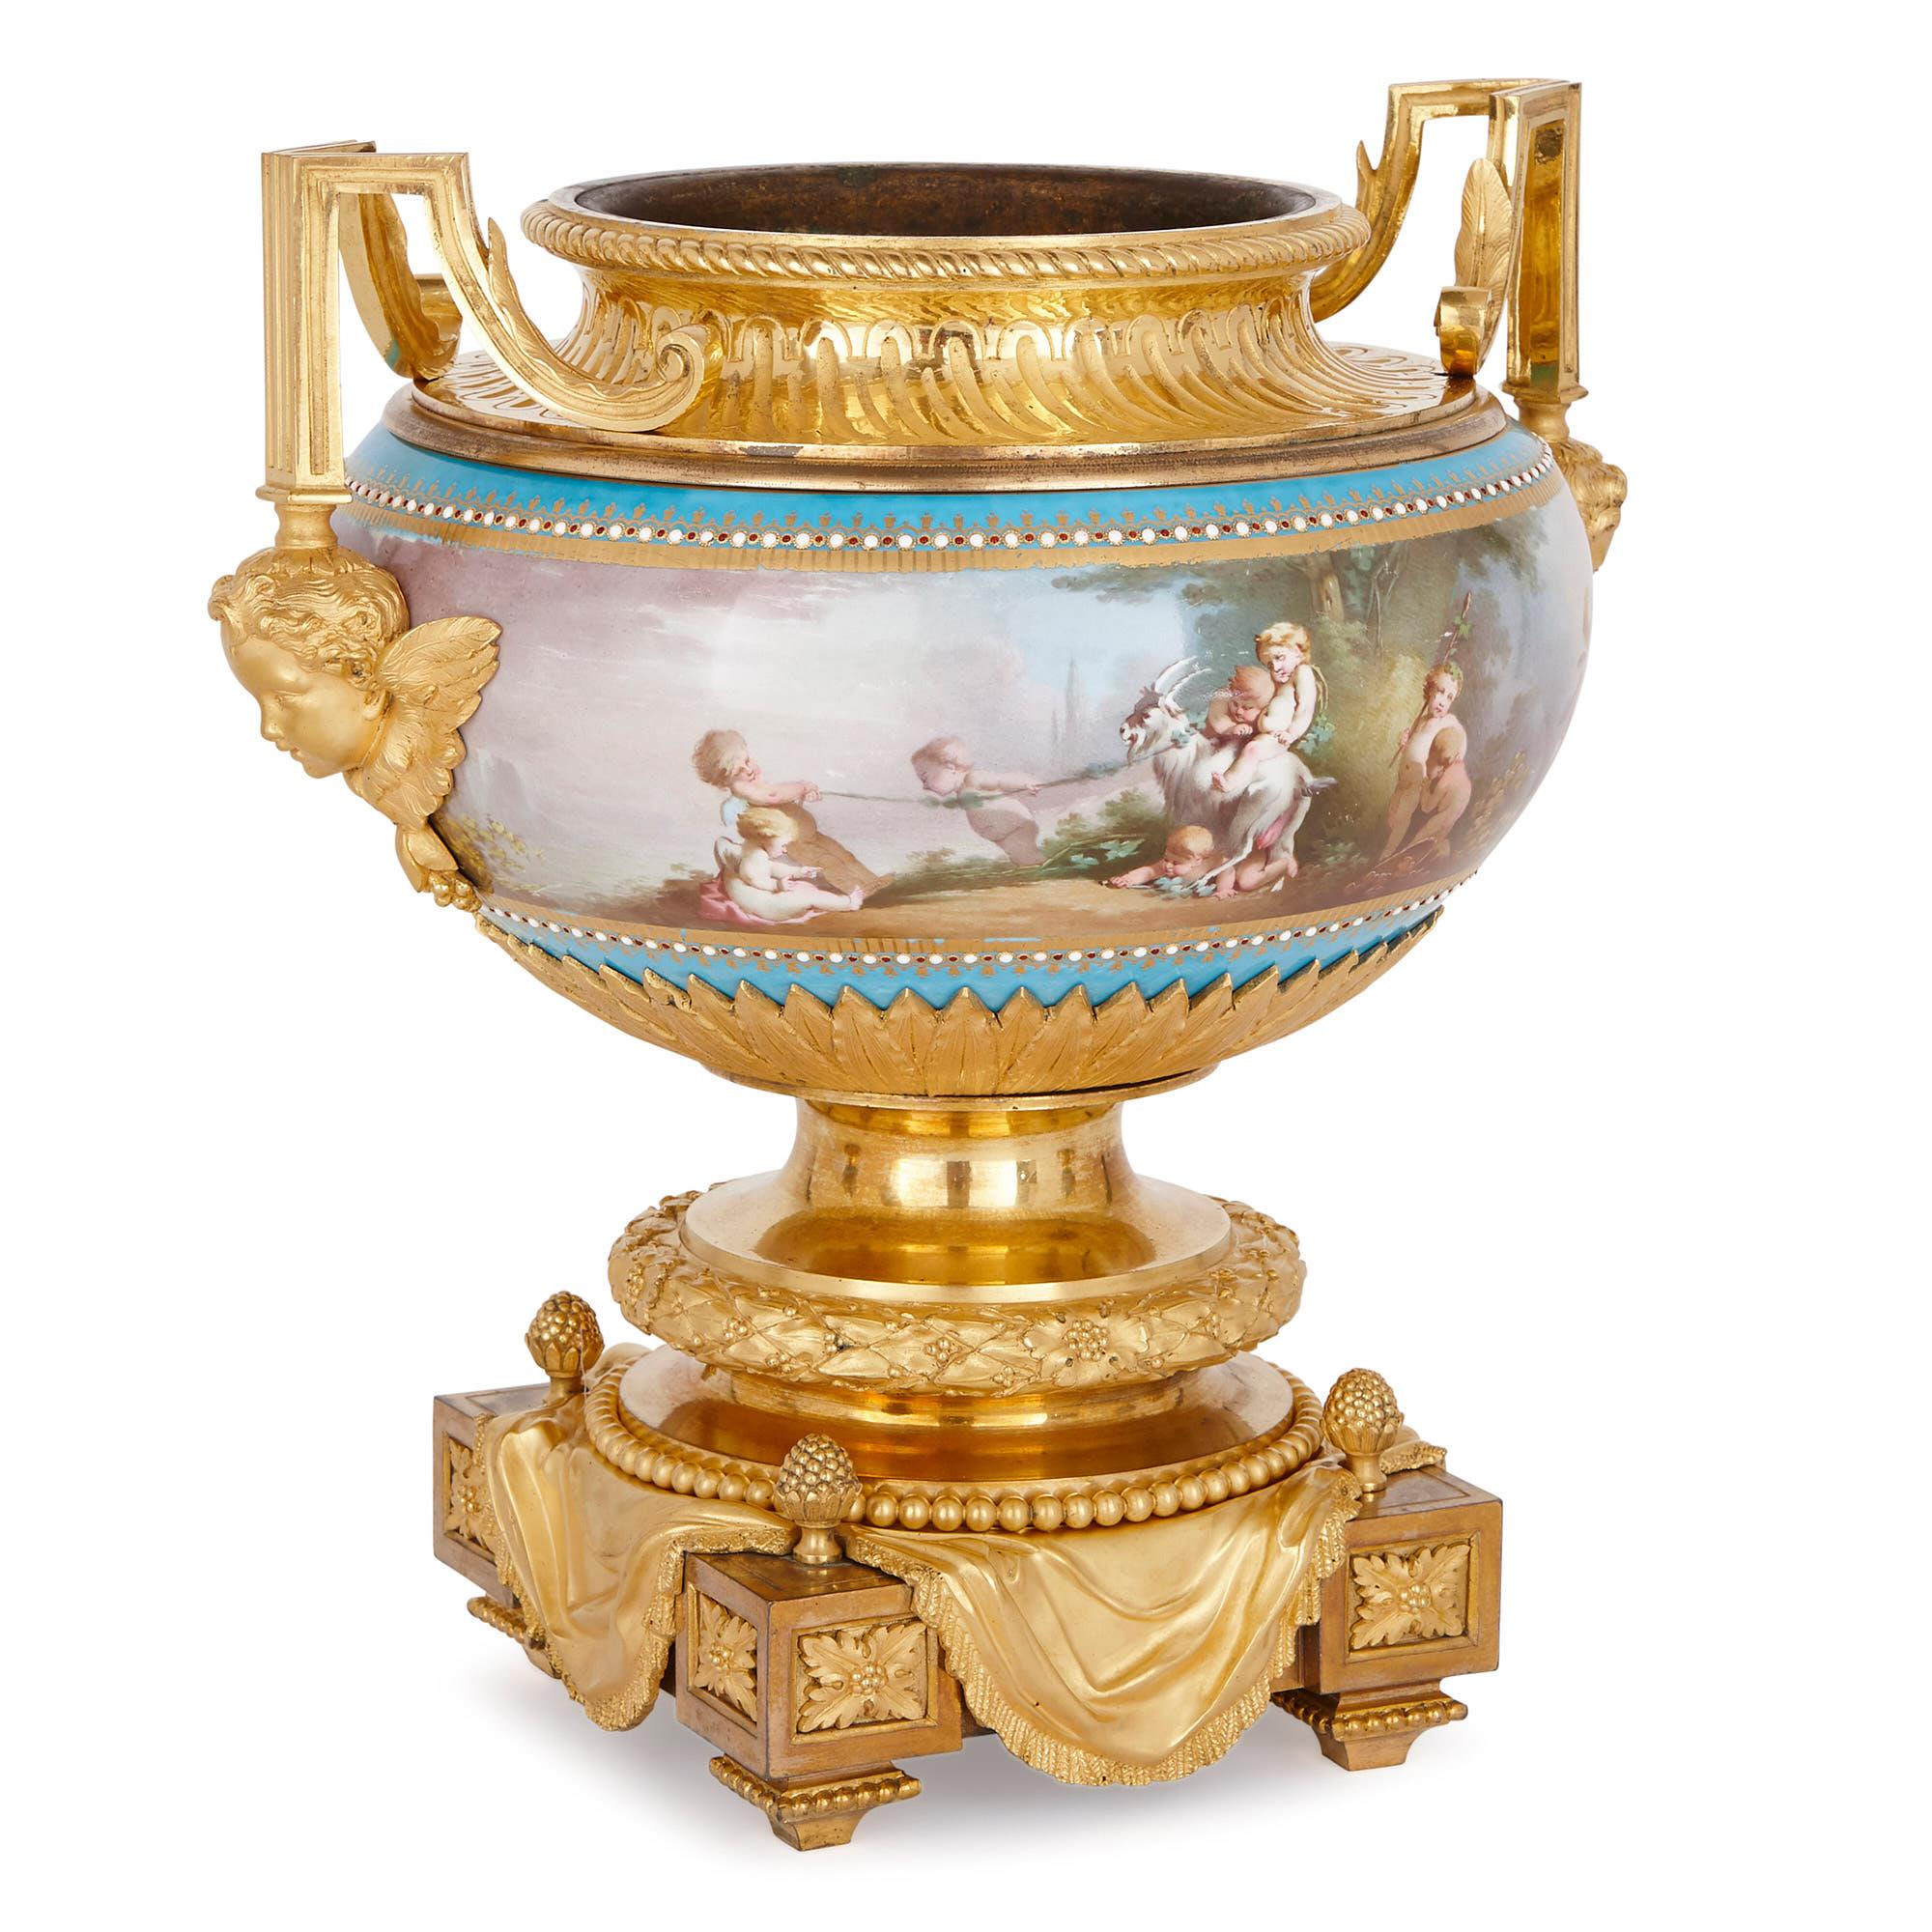 With its delightful painted representations of the four seasons and bacchanalian scenes, this ‘bleu celeste’ garniture demonstrates the technical excellence of Sevres factory porcelain. On top of this, the porcelain vases are beautifully decorated